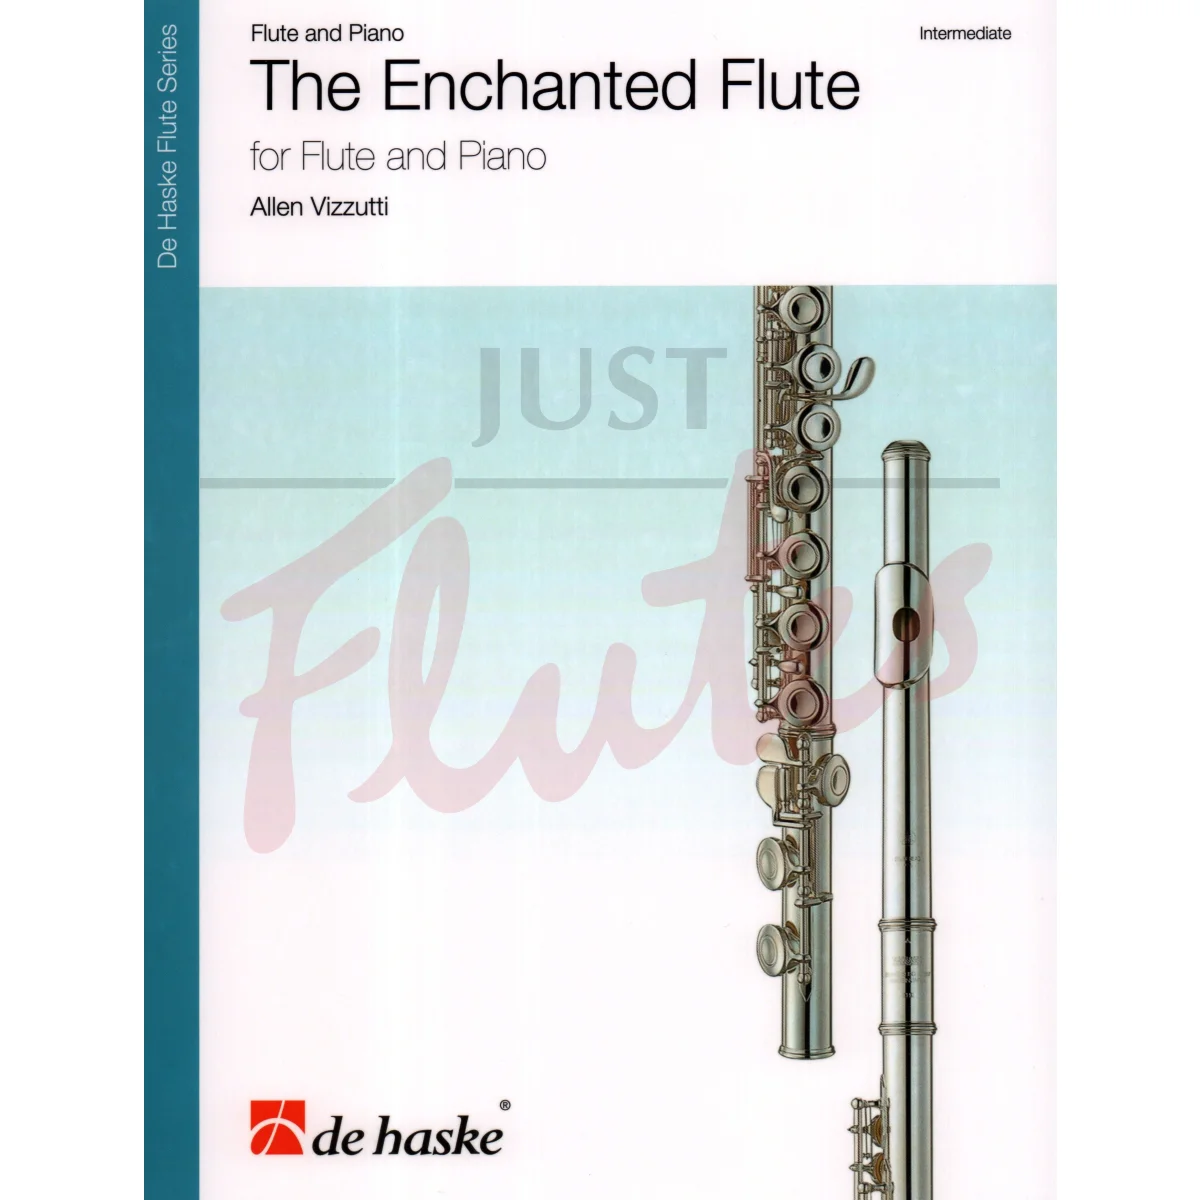 The Enchanted Flute for Flute and Piano